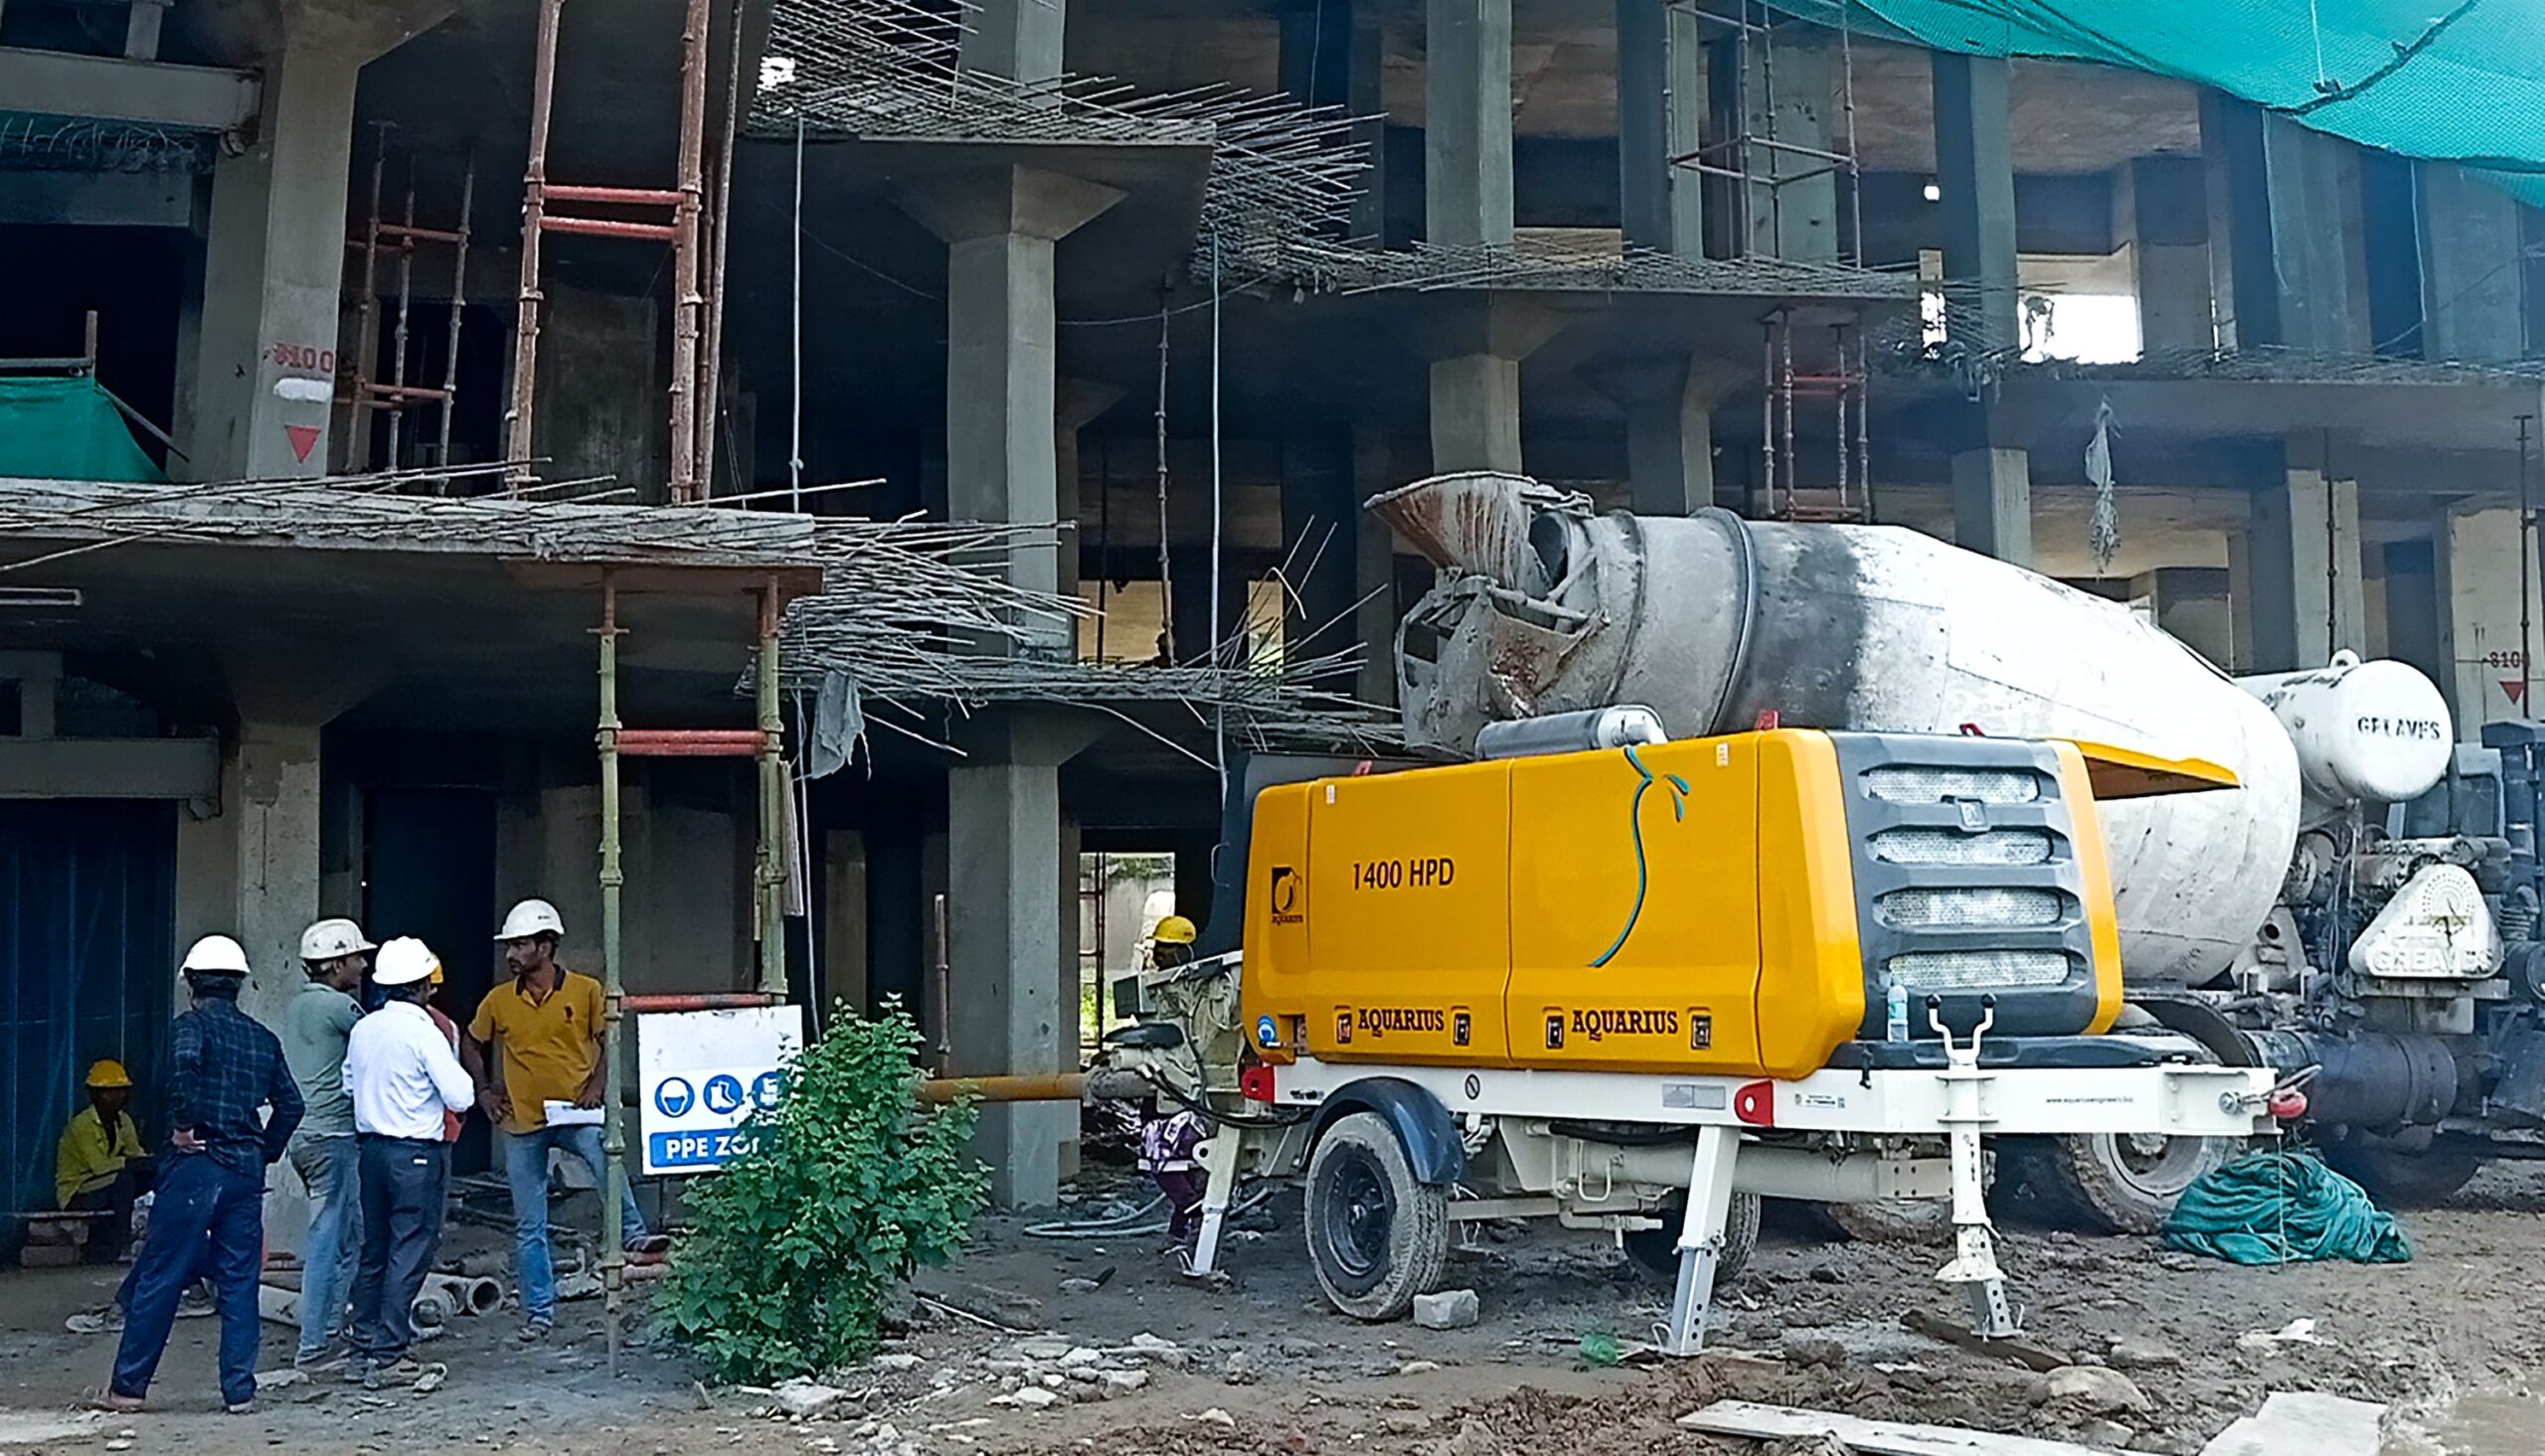 Aquarius 1400 HPD Stationary Concrete Pump working at Roshan Concrete for Highrise Project, Haryana